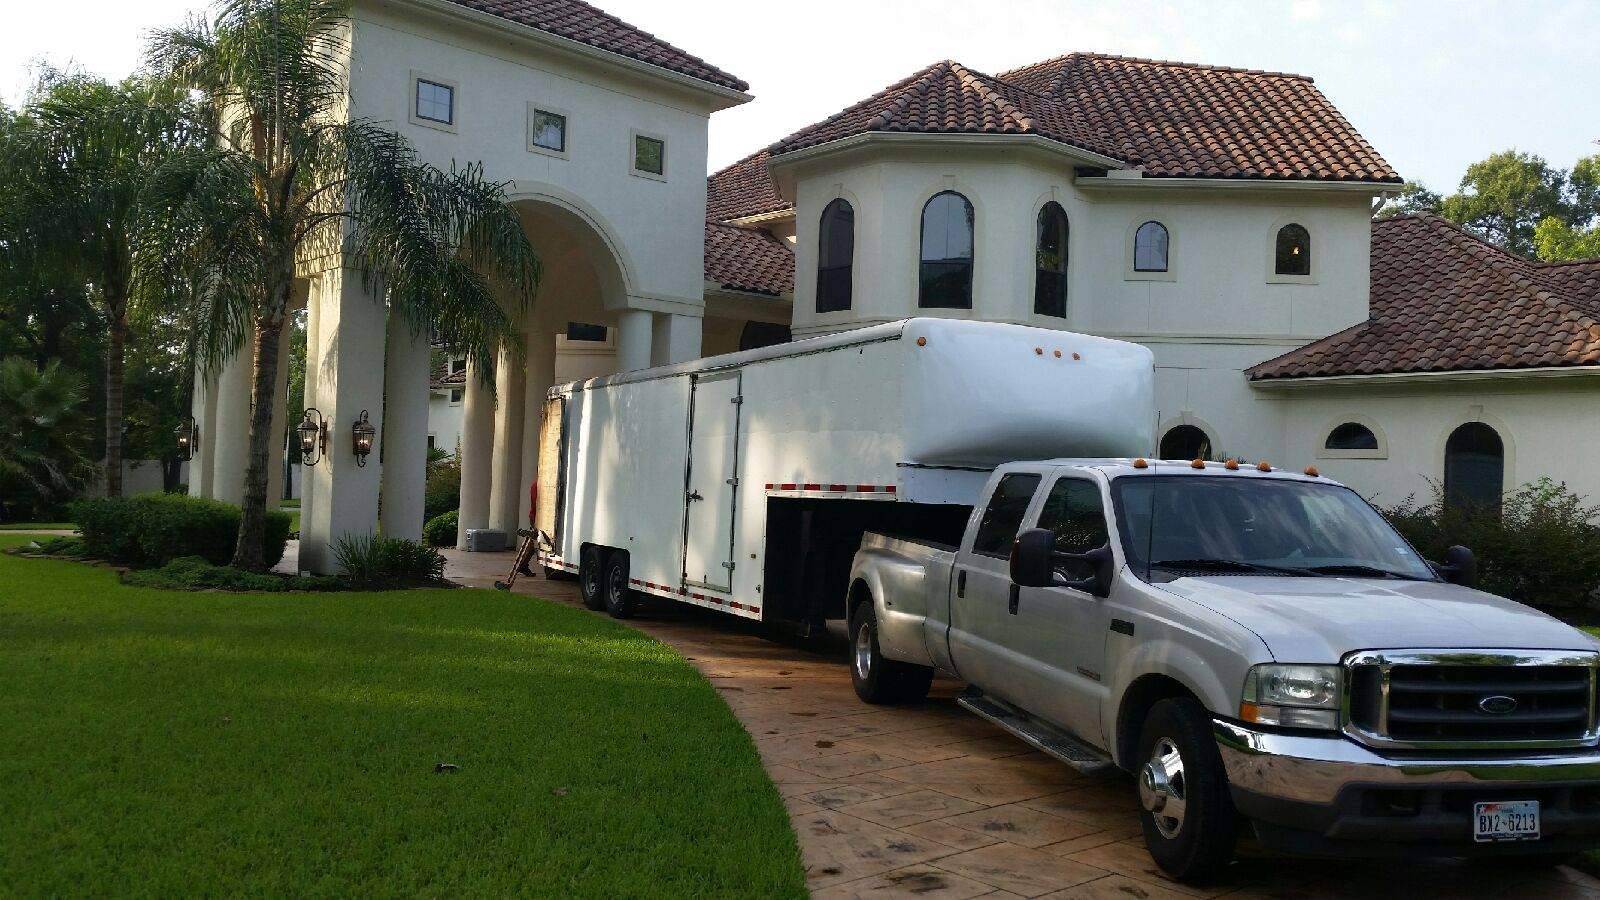 Trusted apartment movers in Leon County, TX area